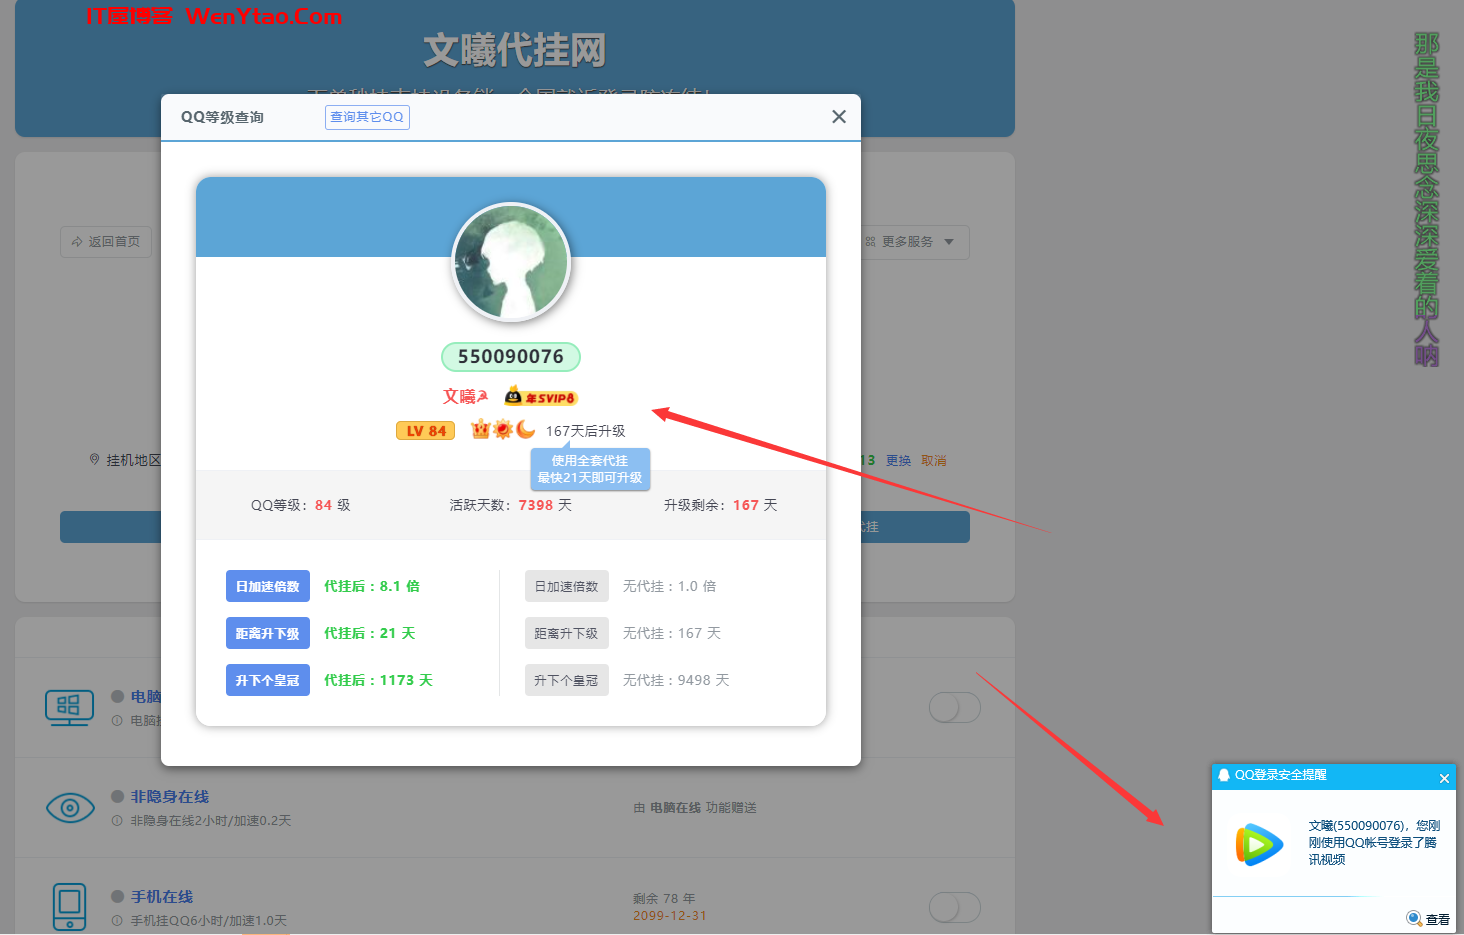  Wenxi Internet connection - the only company in the whole network that has the technology of non freezing QQ level connection, supports QQ common place connection, and can be selected in 30 regions of the country. QQ is in the same place, not frozen. Wenxi Internet connection Wenxi DG system function APP Wenxi online page 1